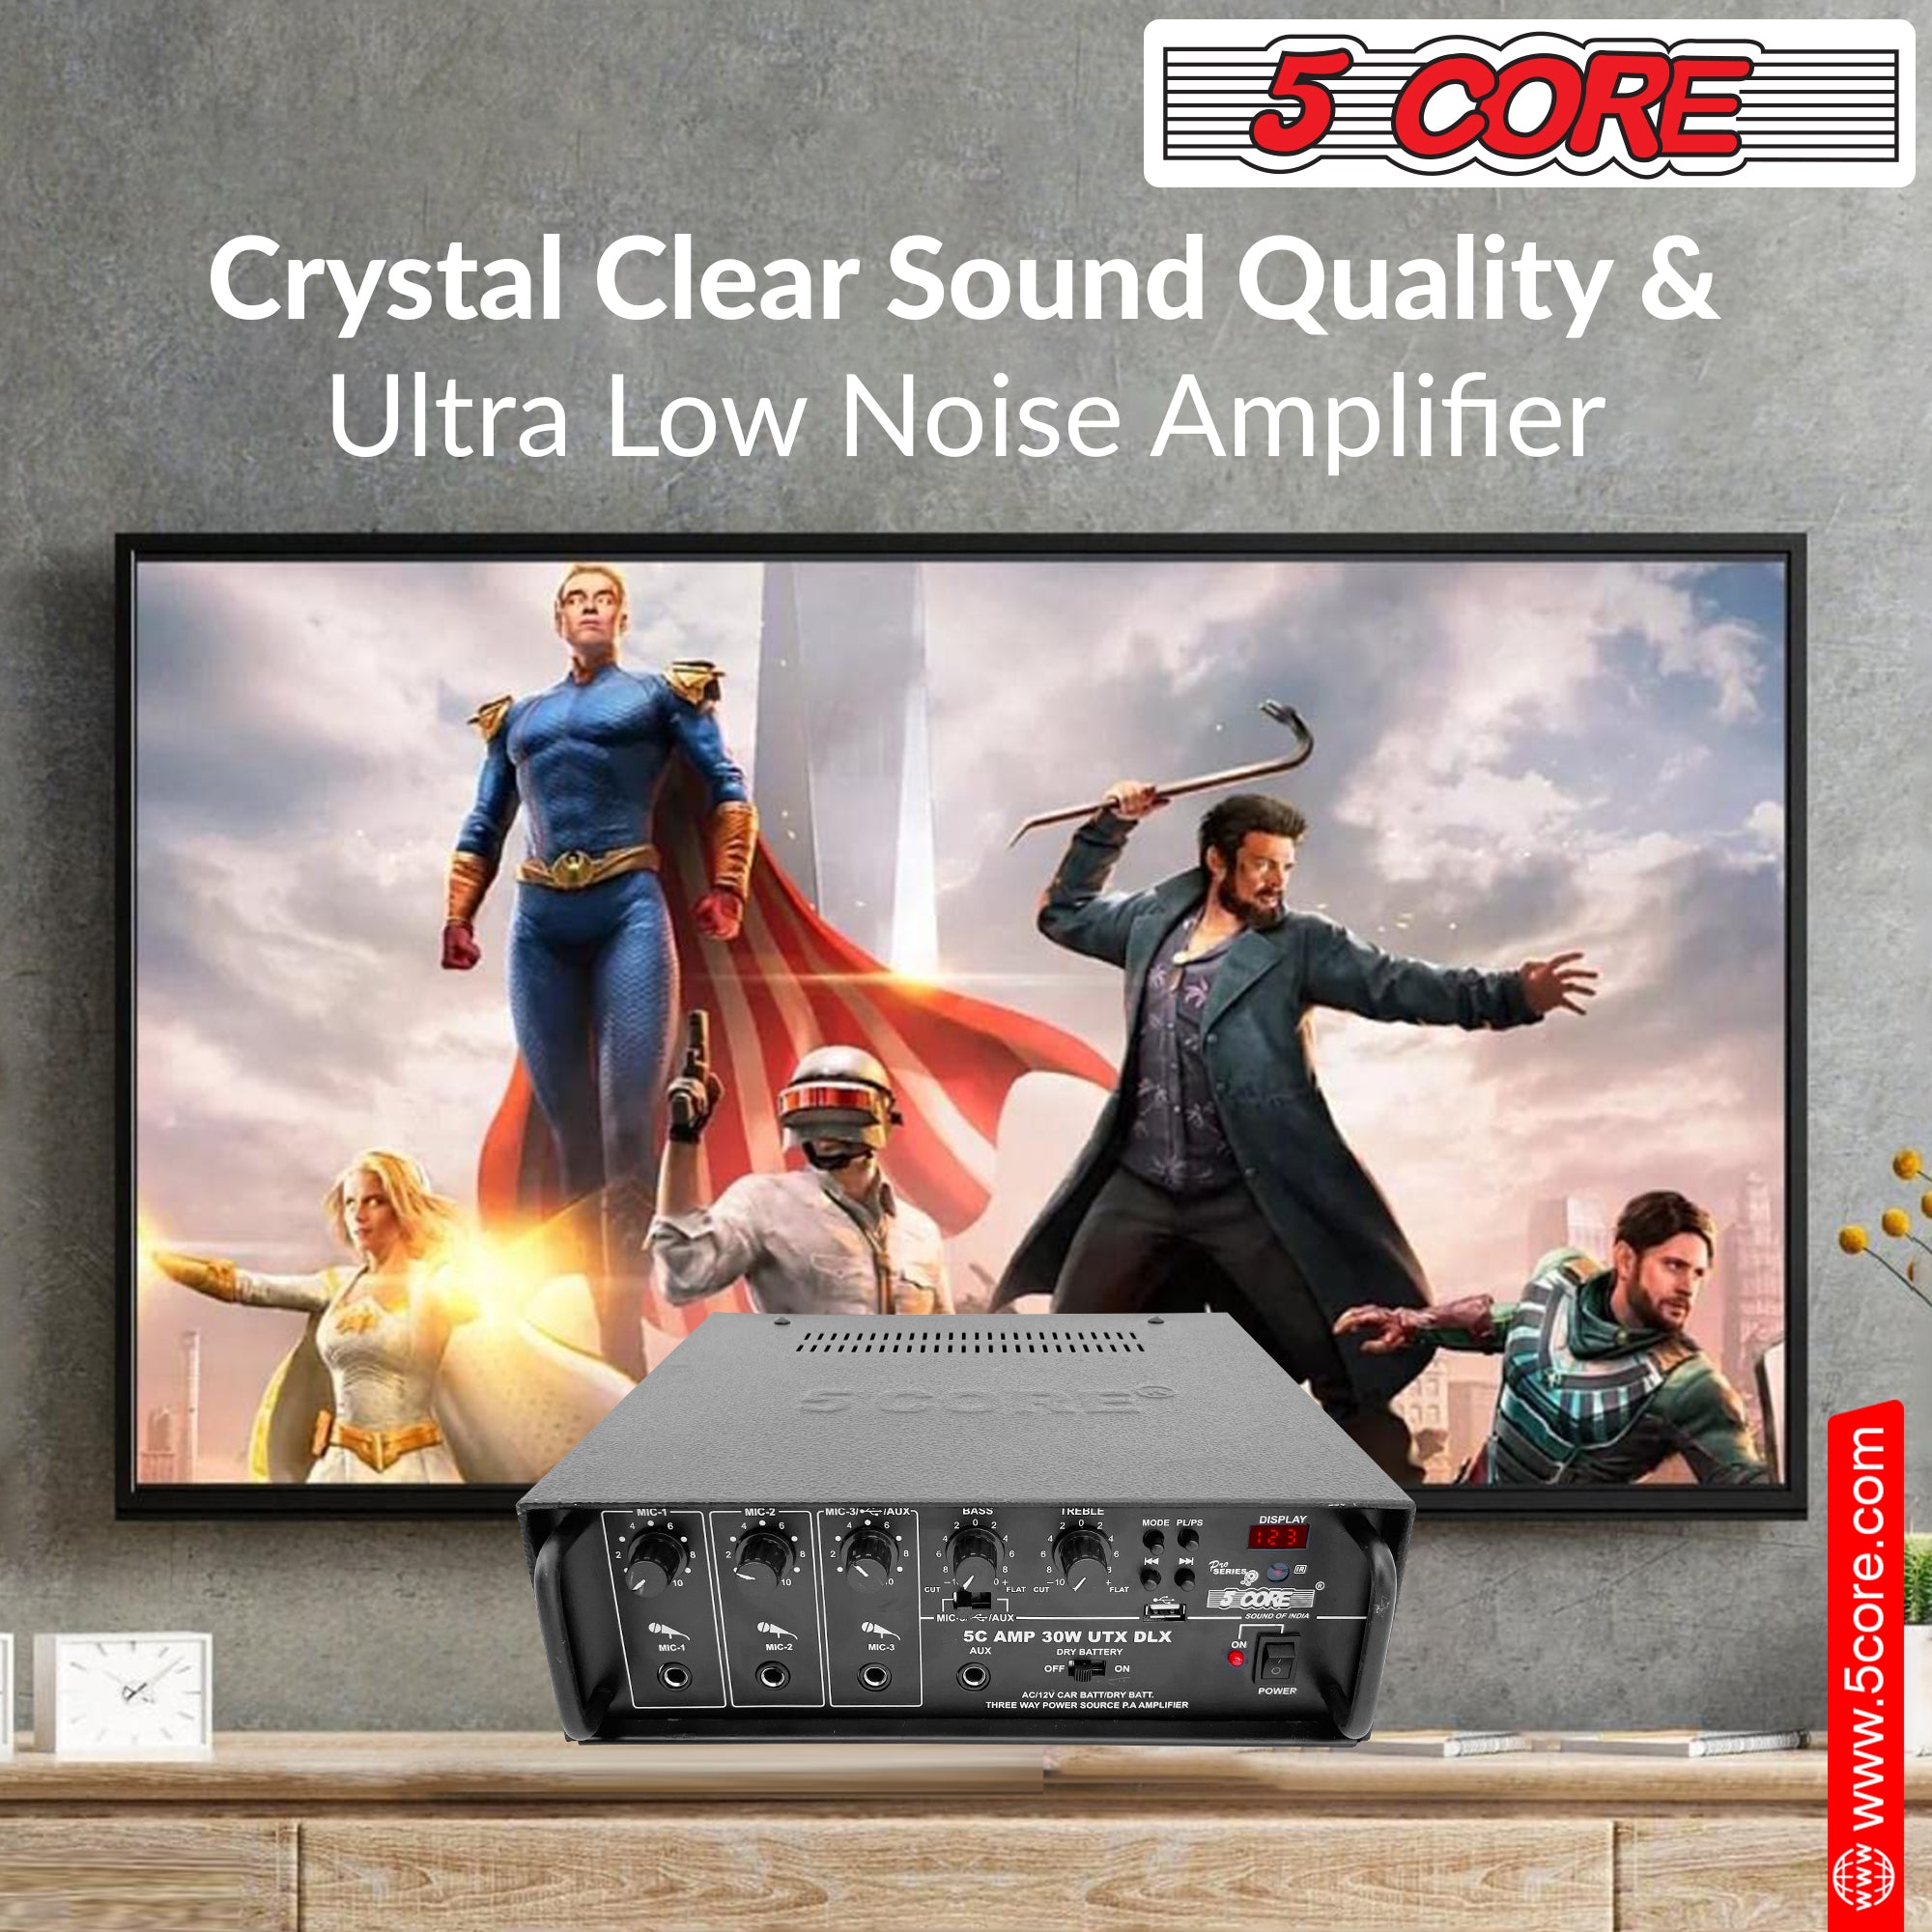 crystal clear sound quality and ultra low noise amplifier